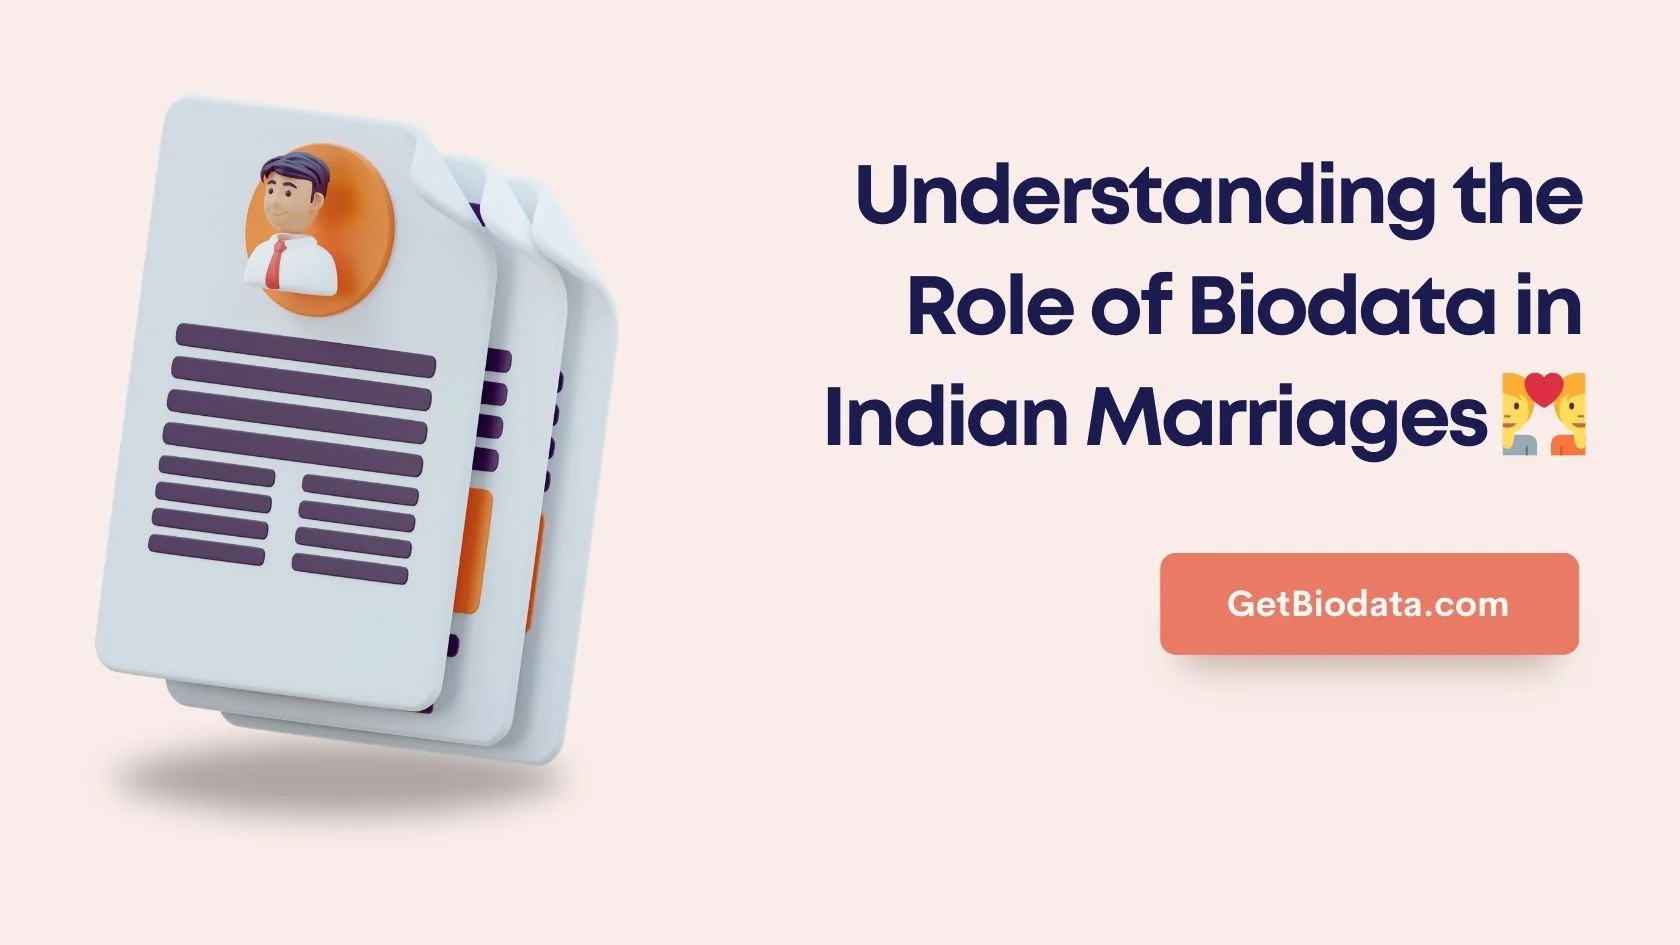 Understanding the Role of Biodata in Indian Marriages